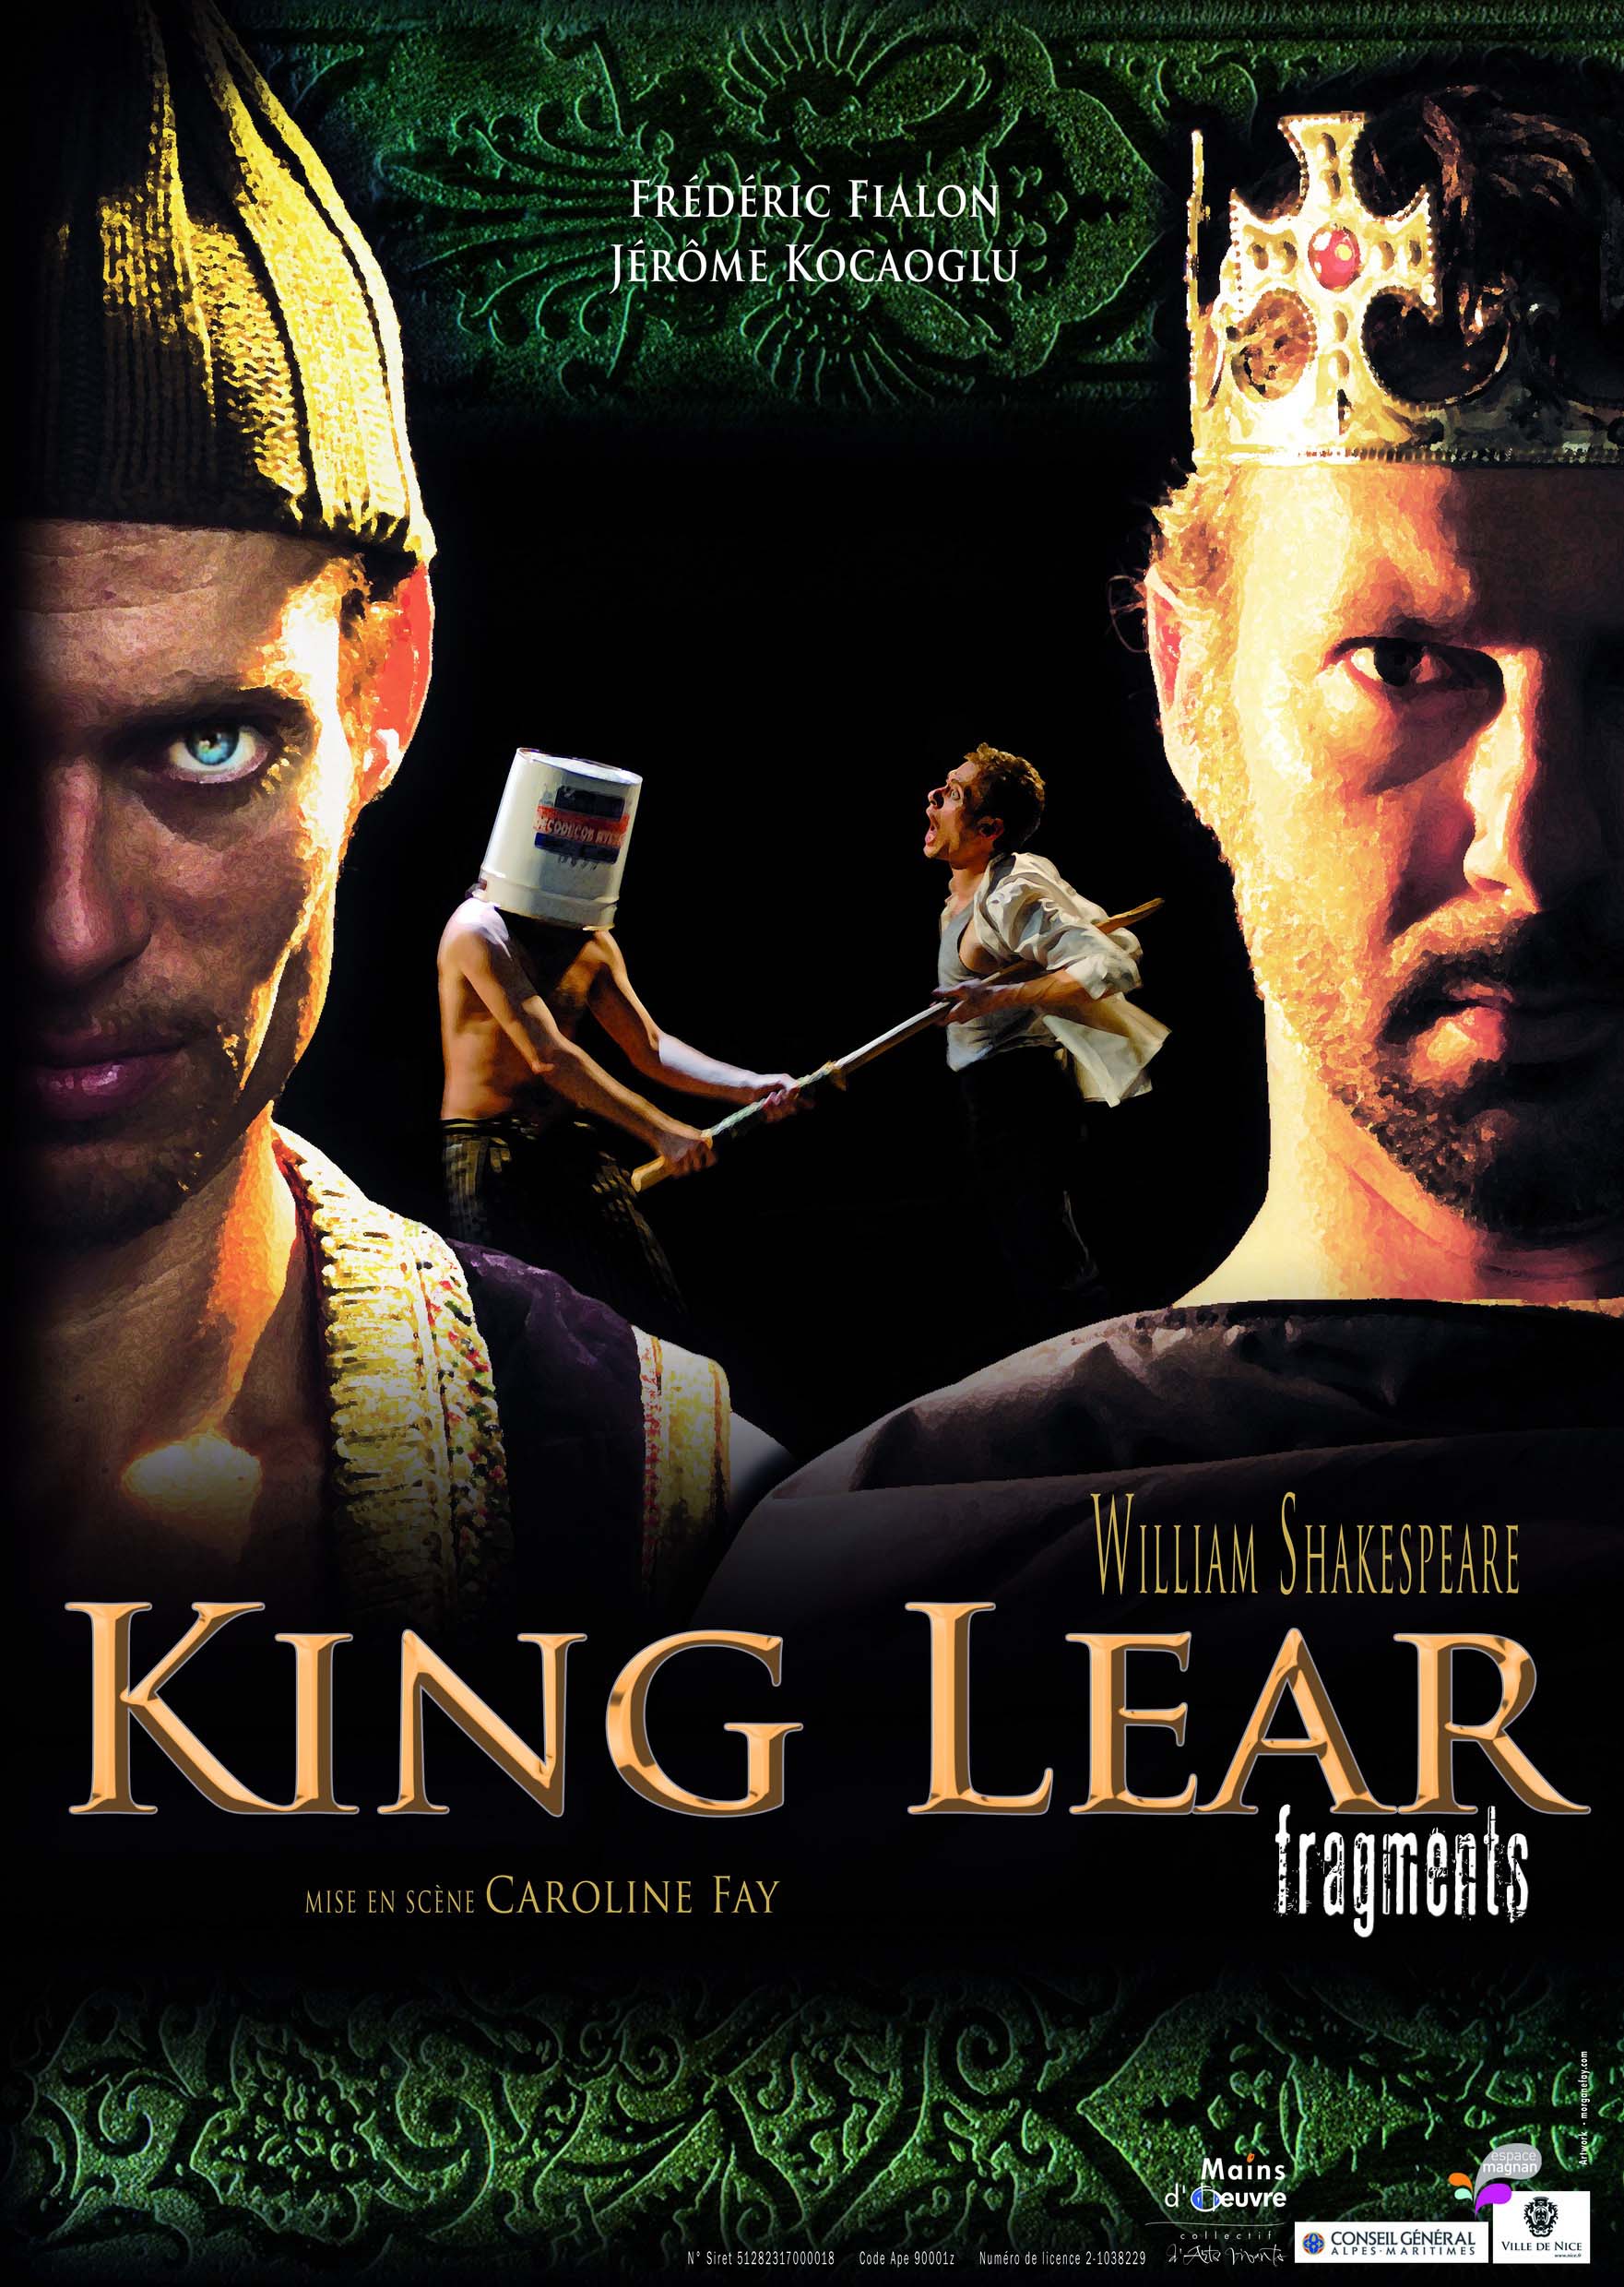 Affiche King Lear Fragments Collectif Mains d'oeuvre